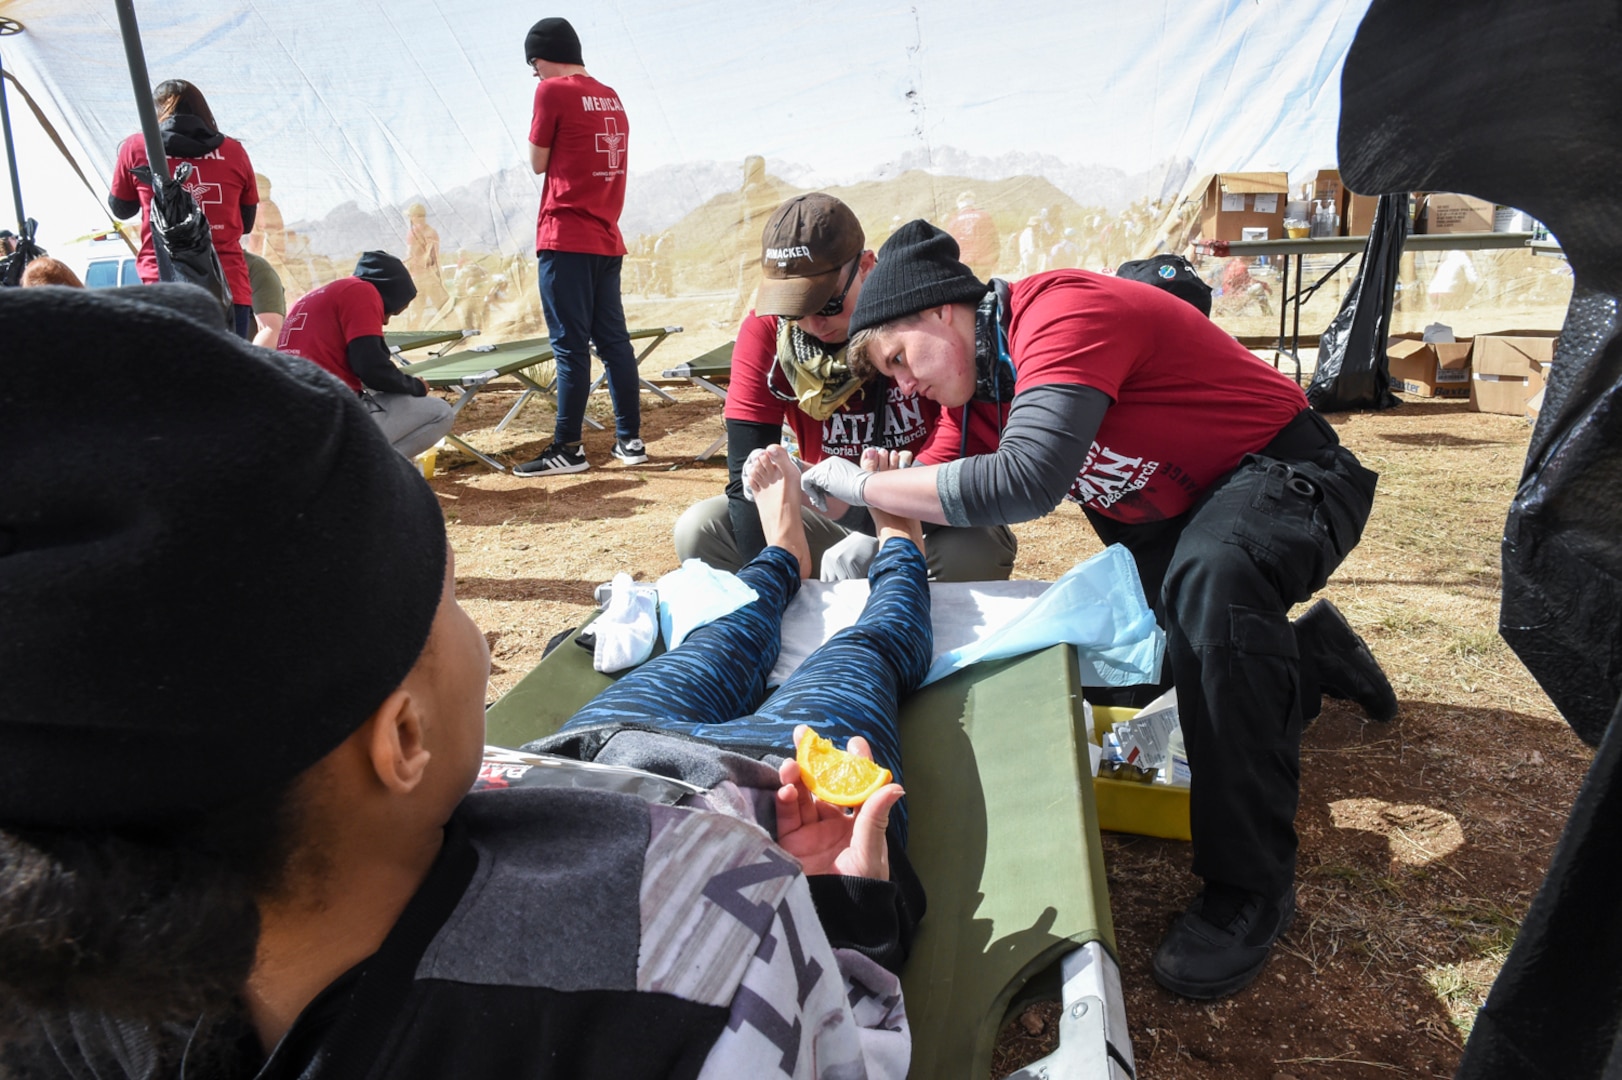 Petty Officer 1st Class Aretha Carmouche receives treatment on her blisters during the 2019 Bataan Memorial Death March, in White Sands, New Mexico, March 17, 2019.